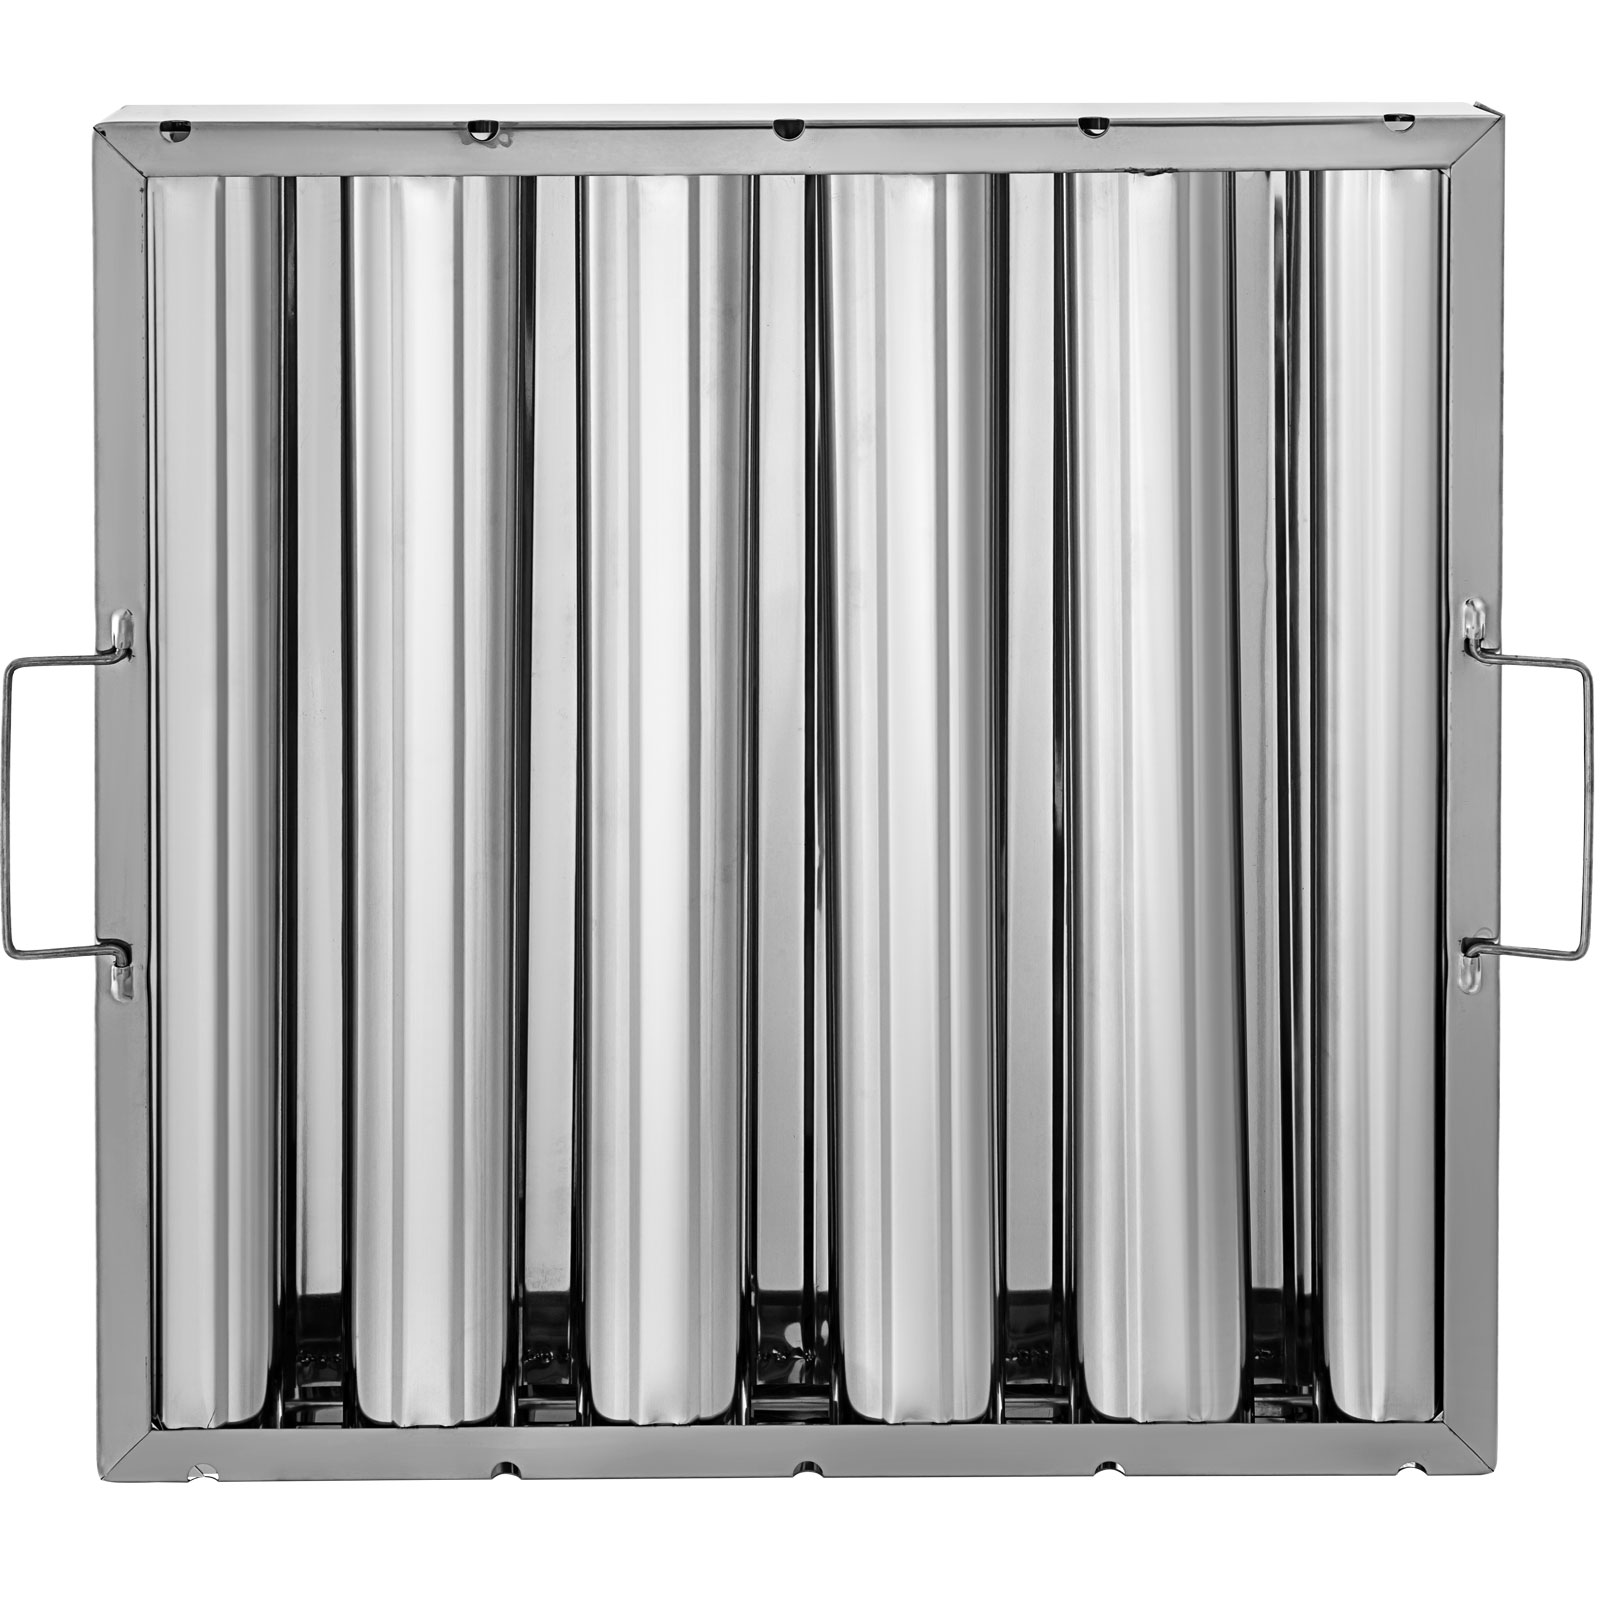 1 pc Stainless Steel Commercial Hood Baffle Grease Filter 16 x 25 